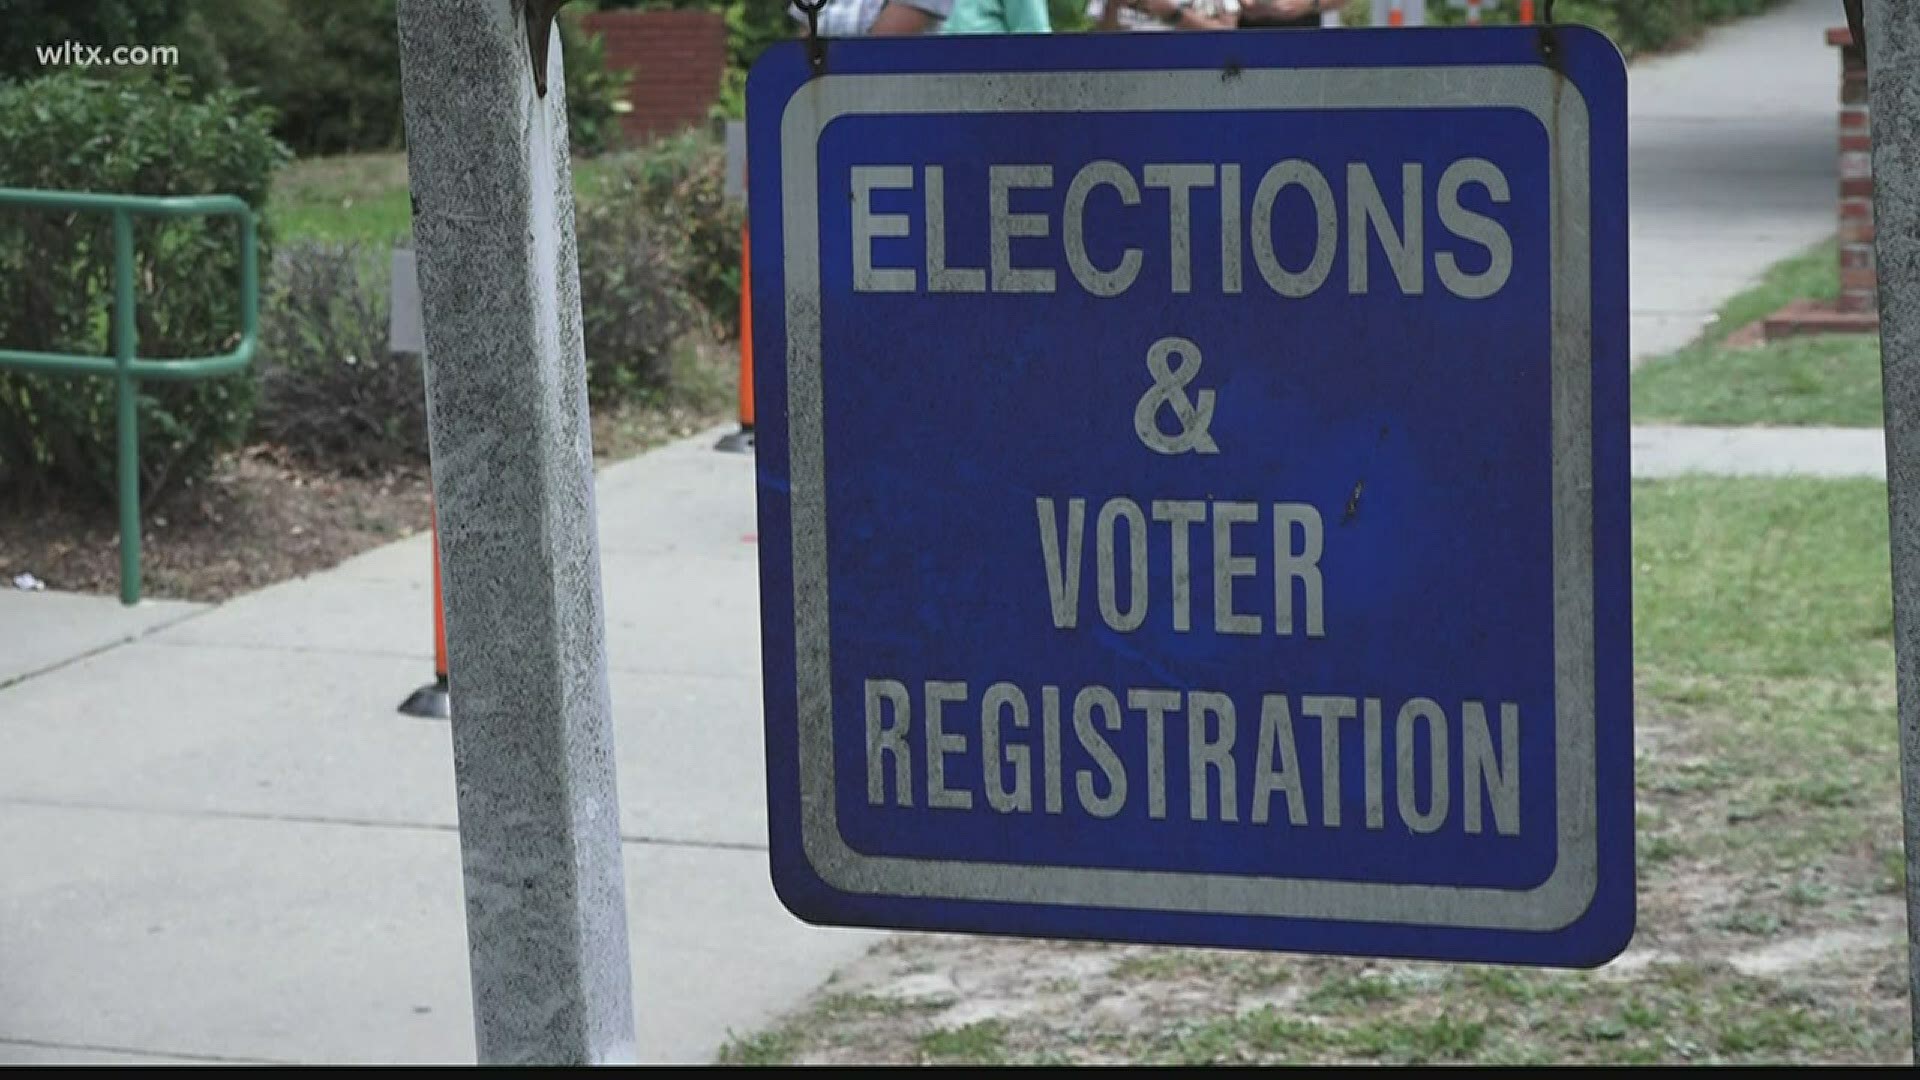 Richland county is trying to get ahead of schedule and sign up thousands of volunteers to work the polls in November.